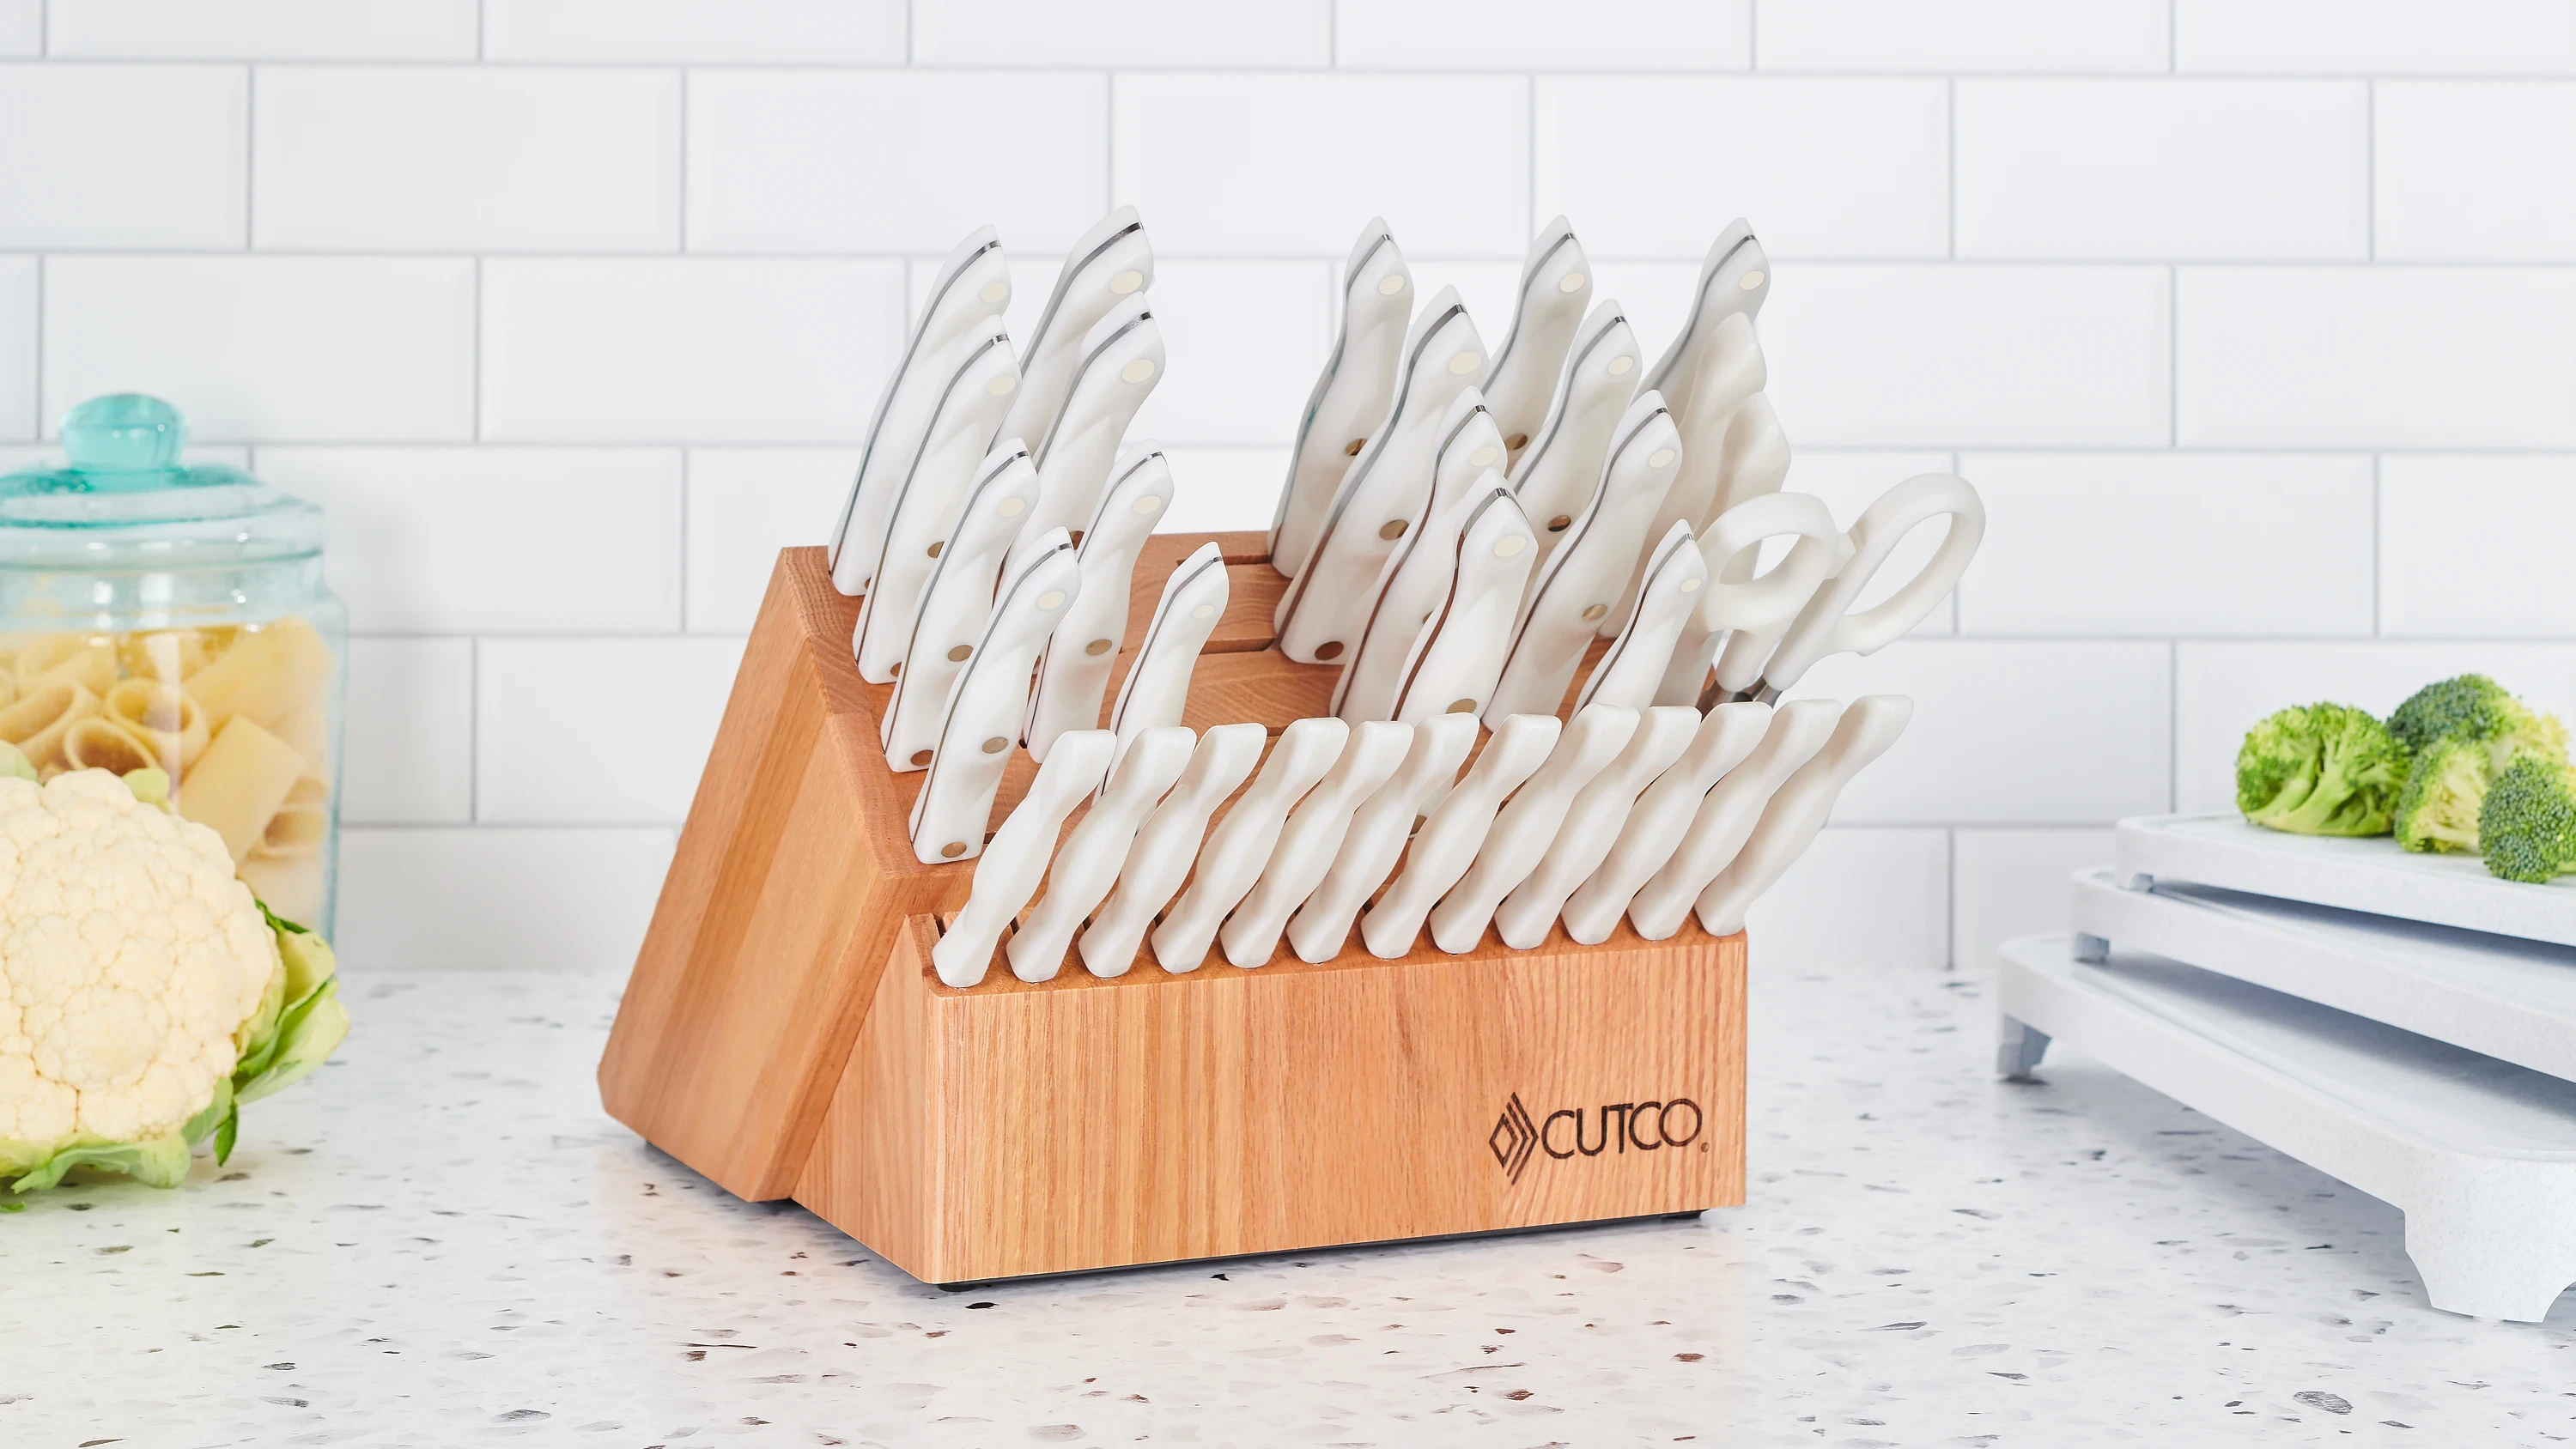 Space Saver Set | 8 Pieces | Knife Block Sets by Cutco